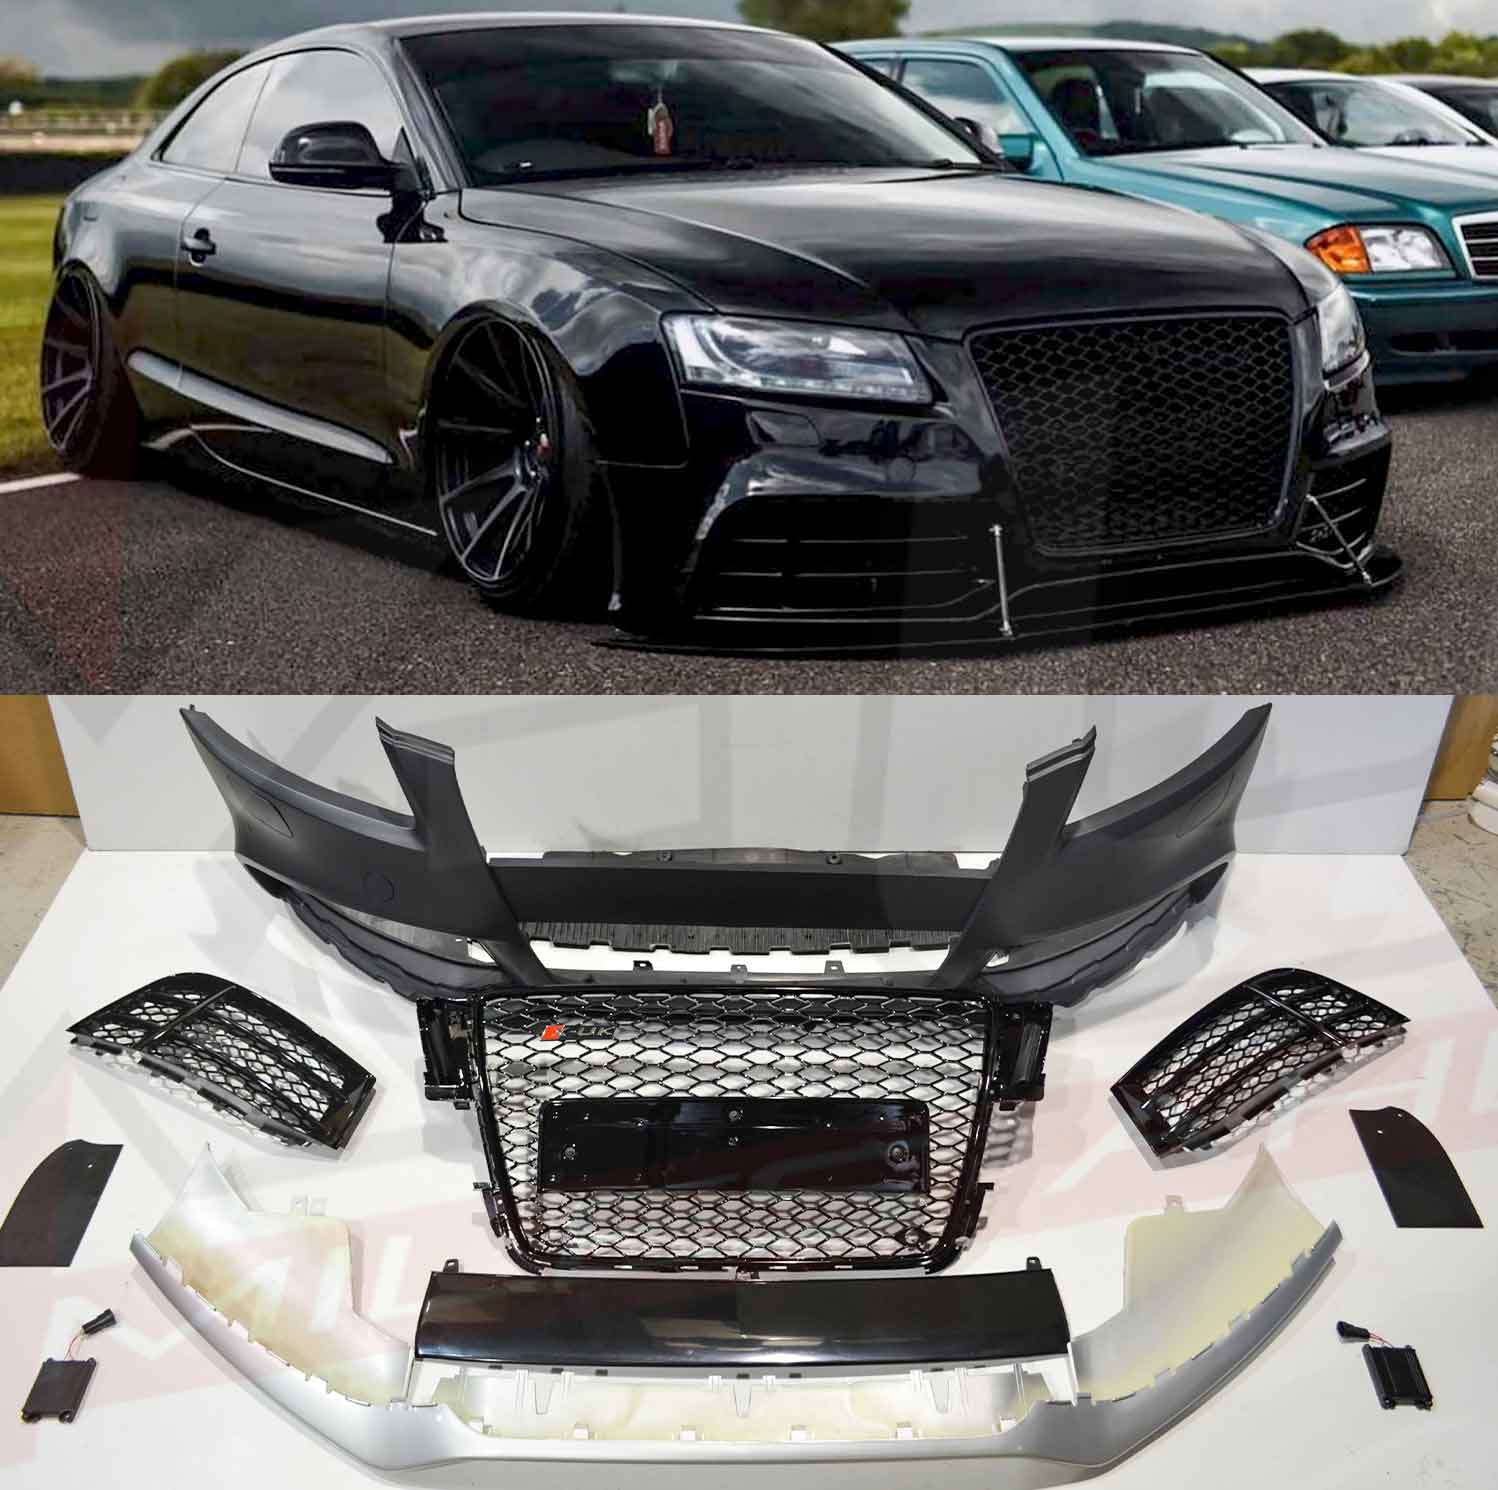 S5 Style Real Carbon Fiber/unpainted Spoiler For Audi A5 2-doors/4